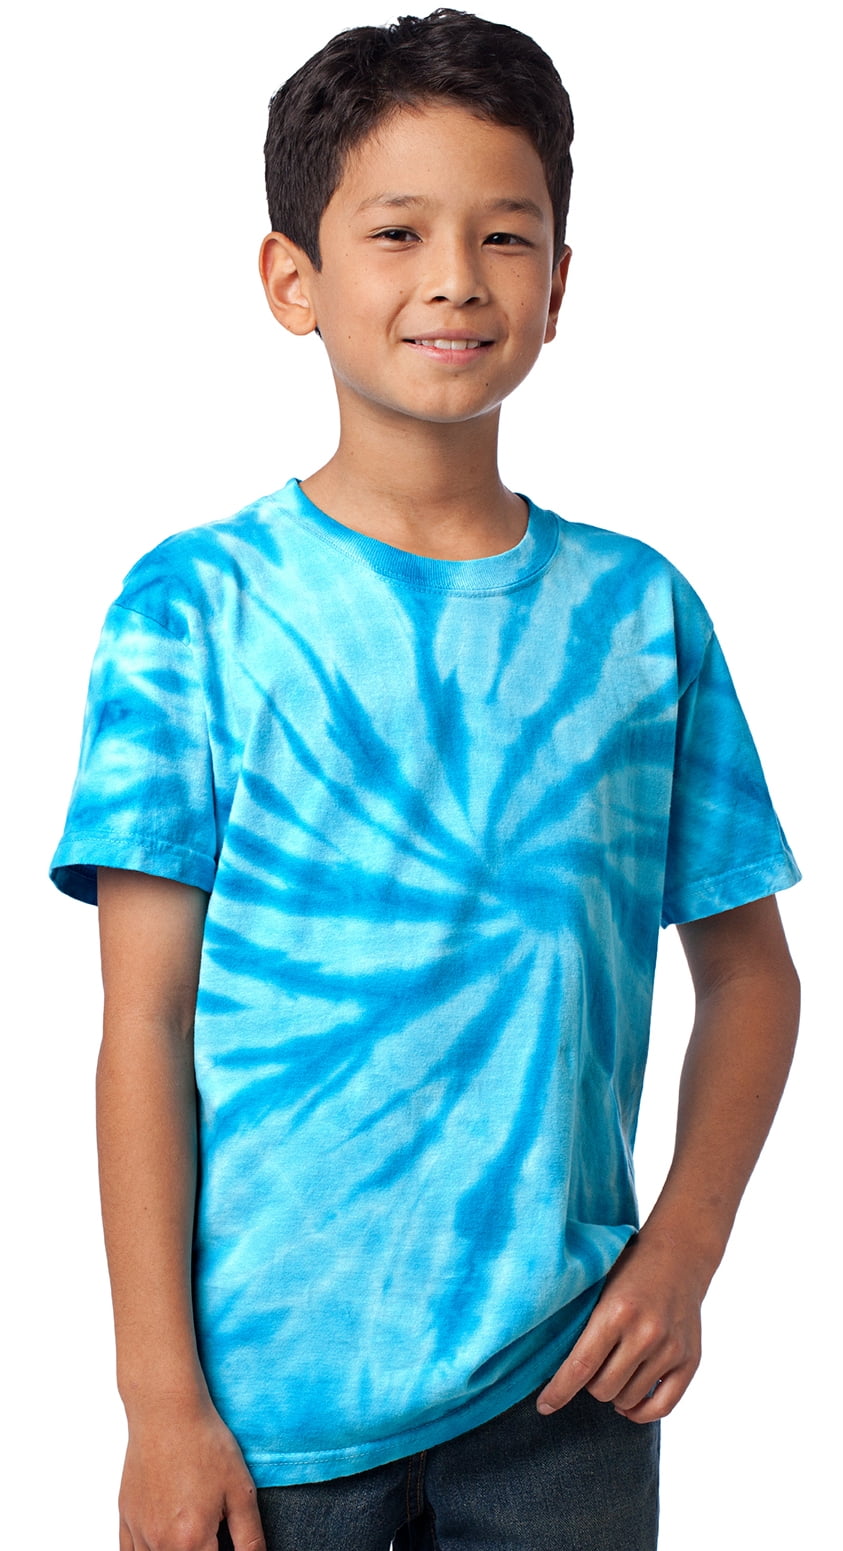 24 One of a Kind Fruit of the Loom HD Cotton Youth Size XS Peace for All ~ Tie Dye Toddler Peace Sign Short Sleeve T-shirt